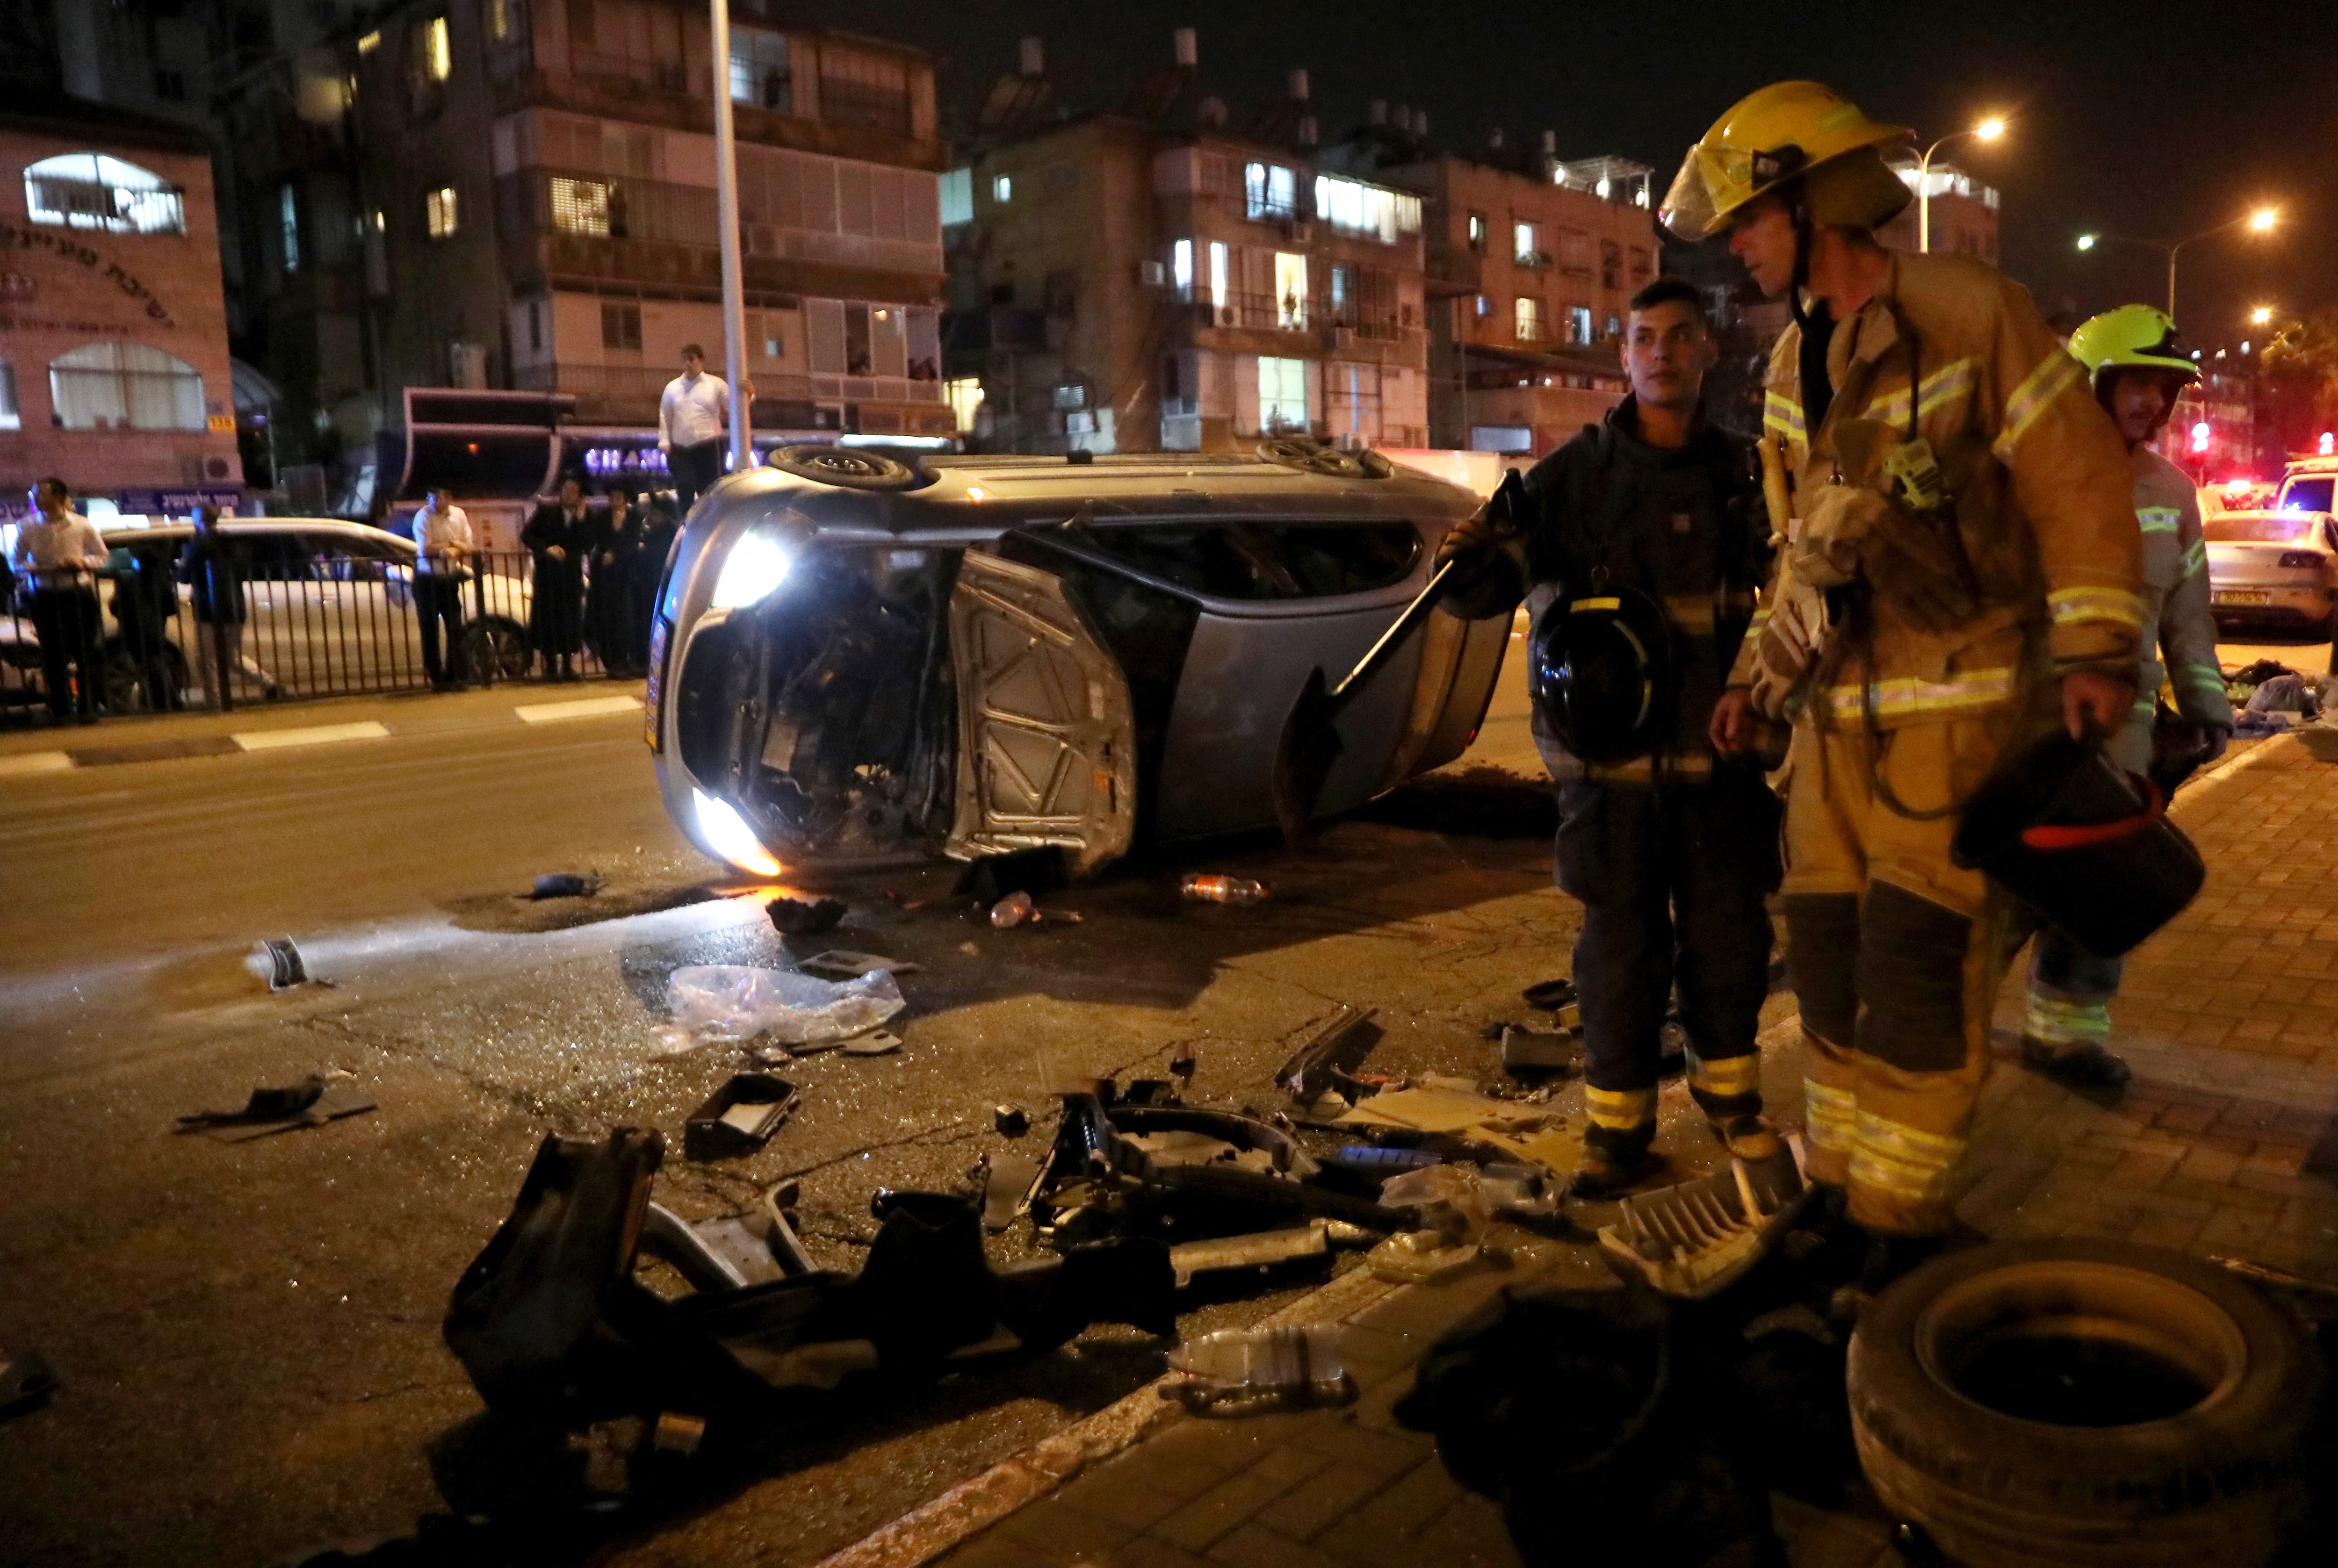 An overturned vehicle lies on the road at the scene of a shooting attack on March 29, 2022 in Bnei Brak, 7km (4.5 miles) east of Tel Aviv. Five people were killed in gun attacks Tuesday near the Israeli coastal city of Tel Aviv, emergency responders said, in the third fatal gun or knife spree in the Jewish state in a week (AFP photo)